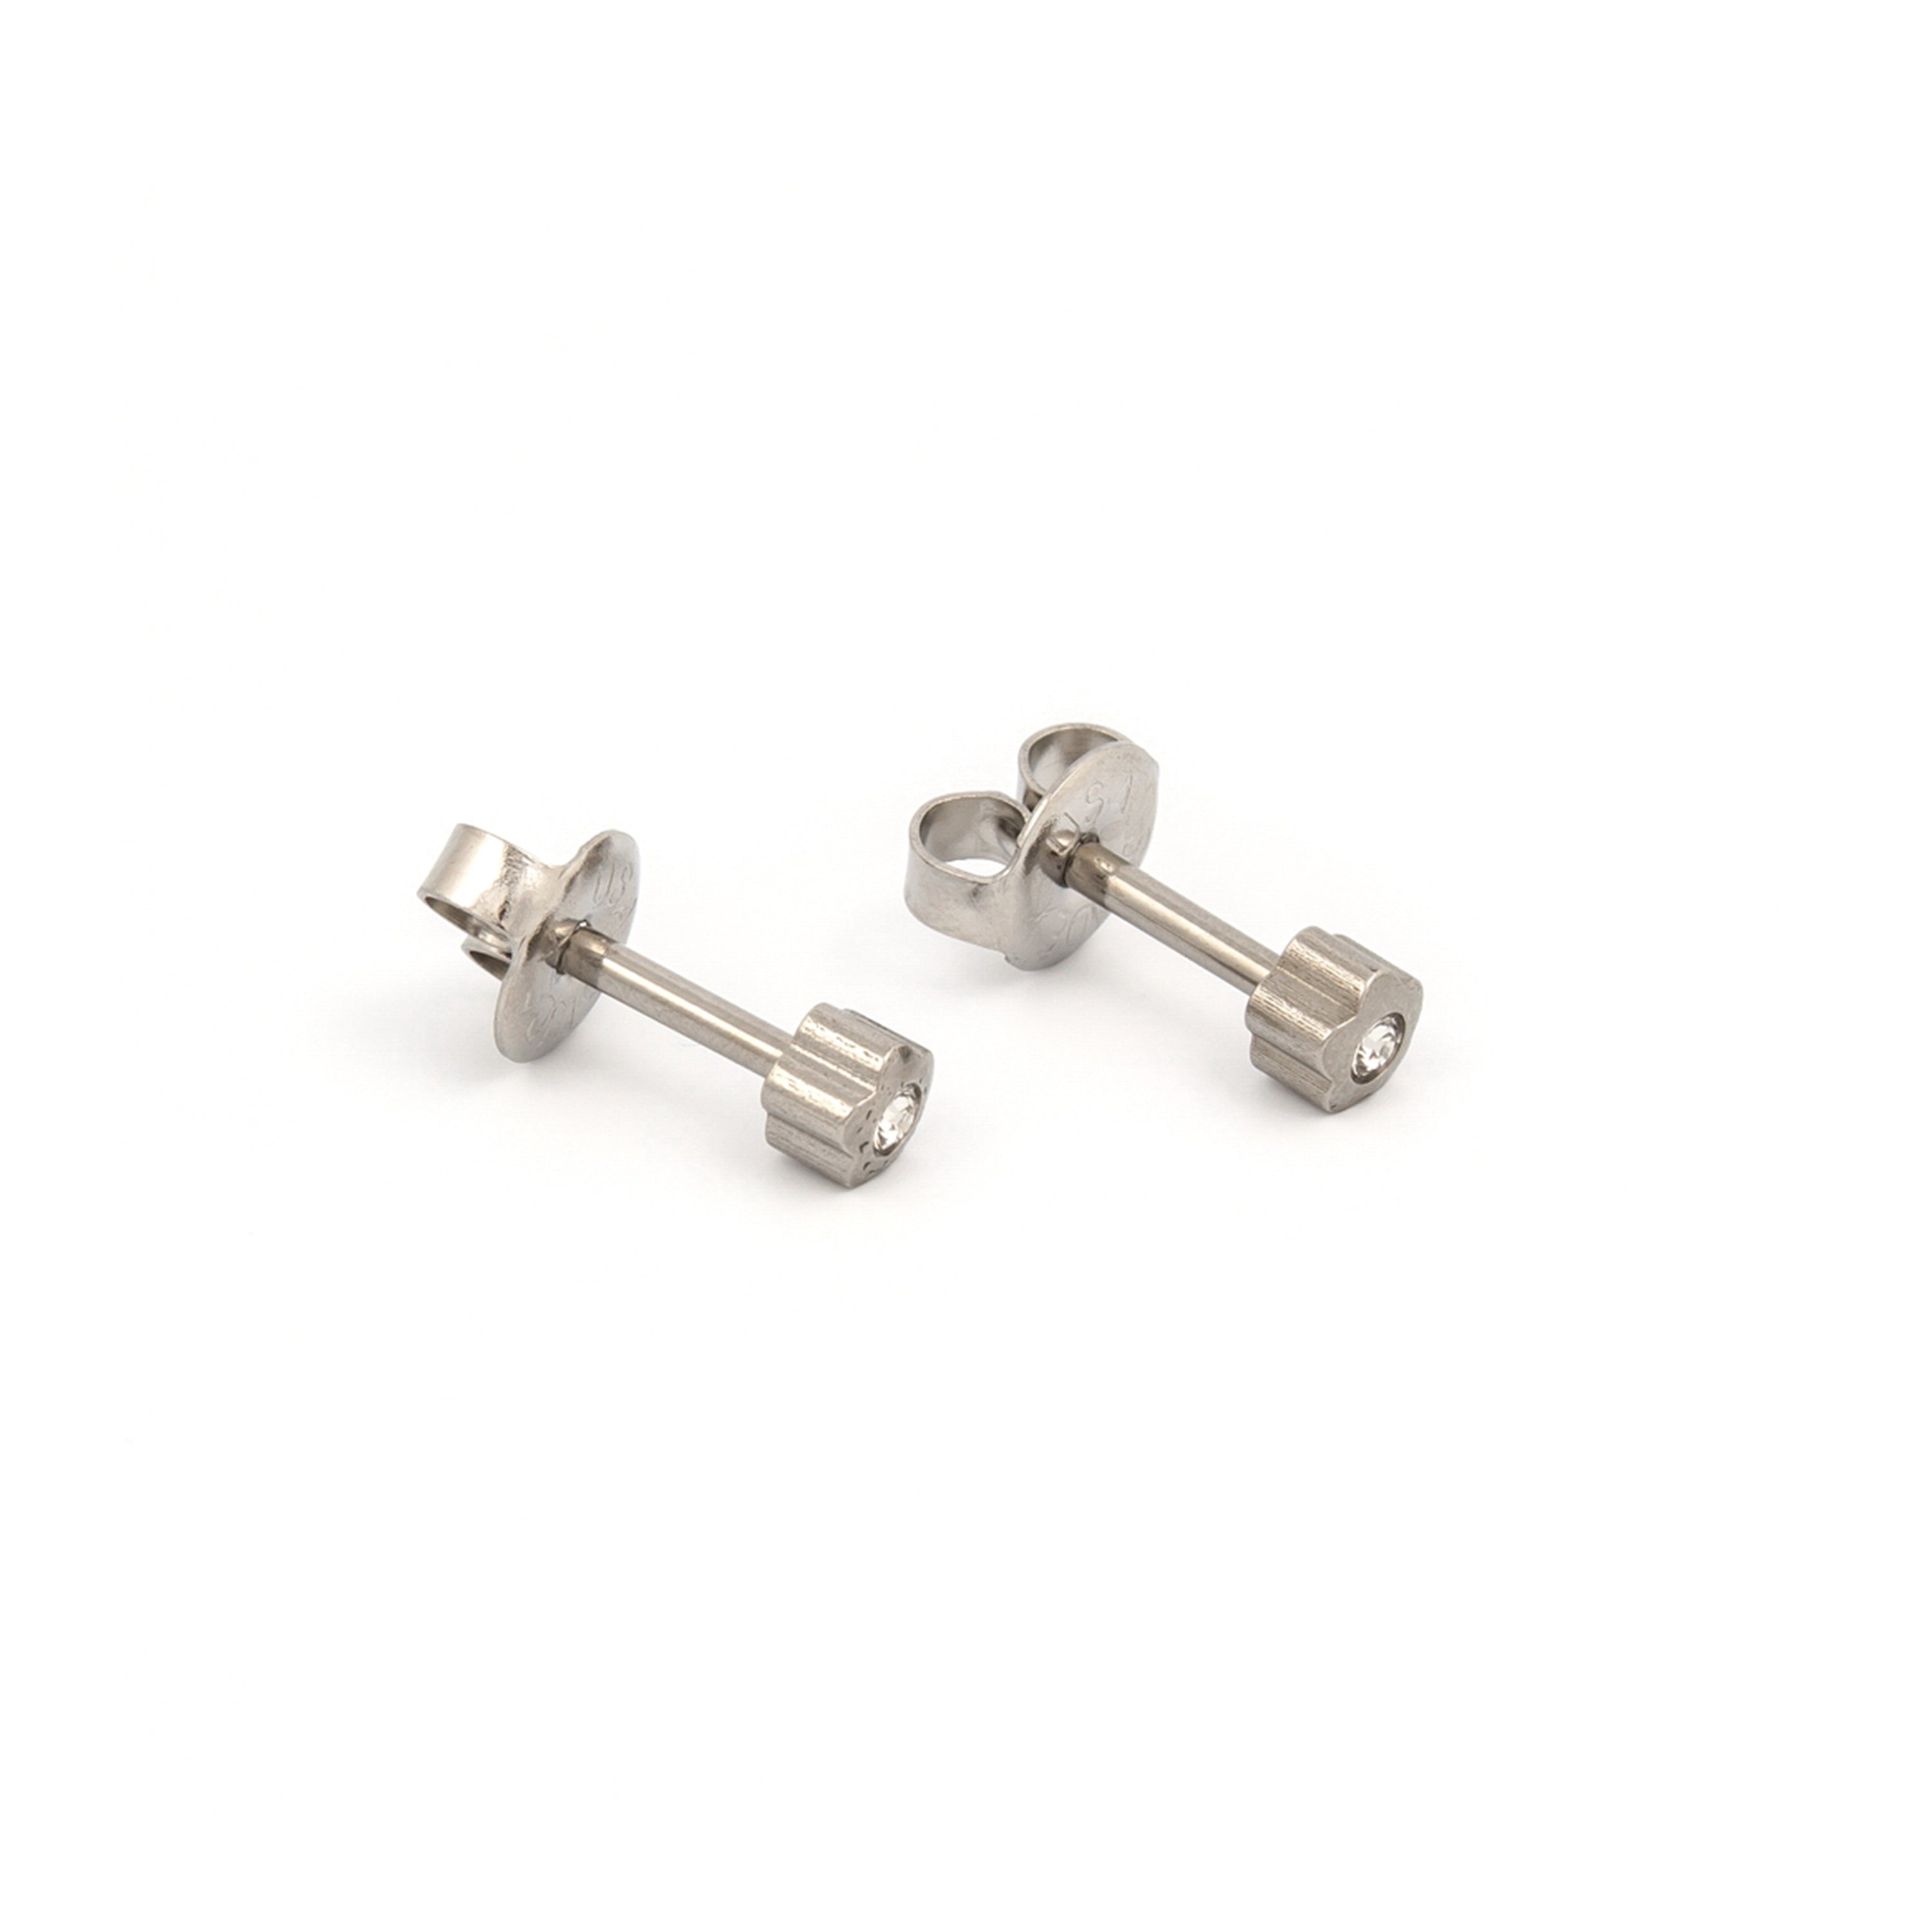 3MM Flower Studs Allergy free Stainless Steel Ear Studs | MADE IN USA | Ideal for everyday wear